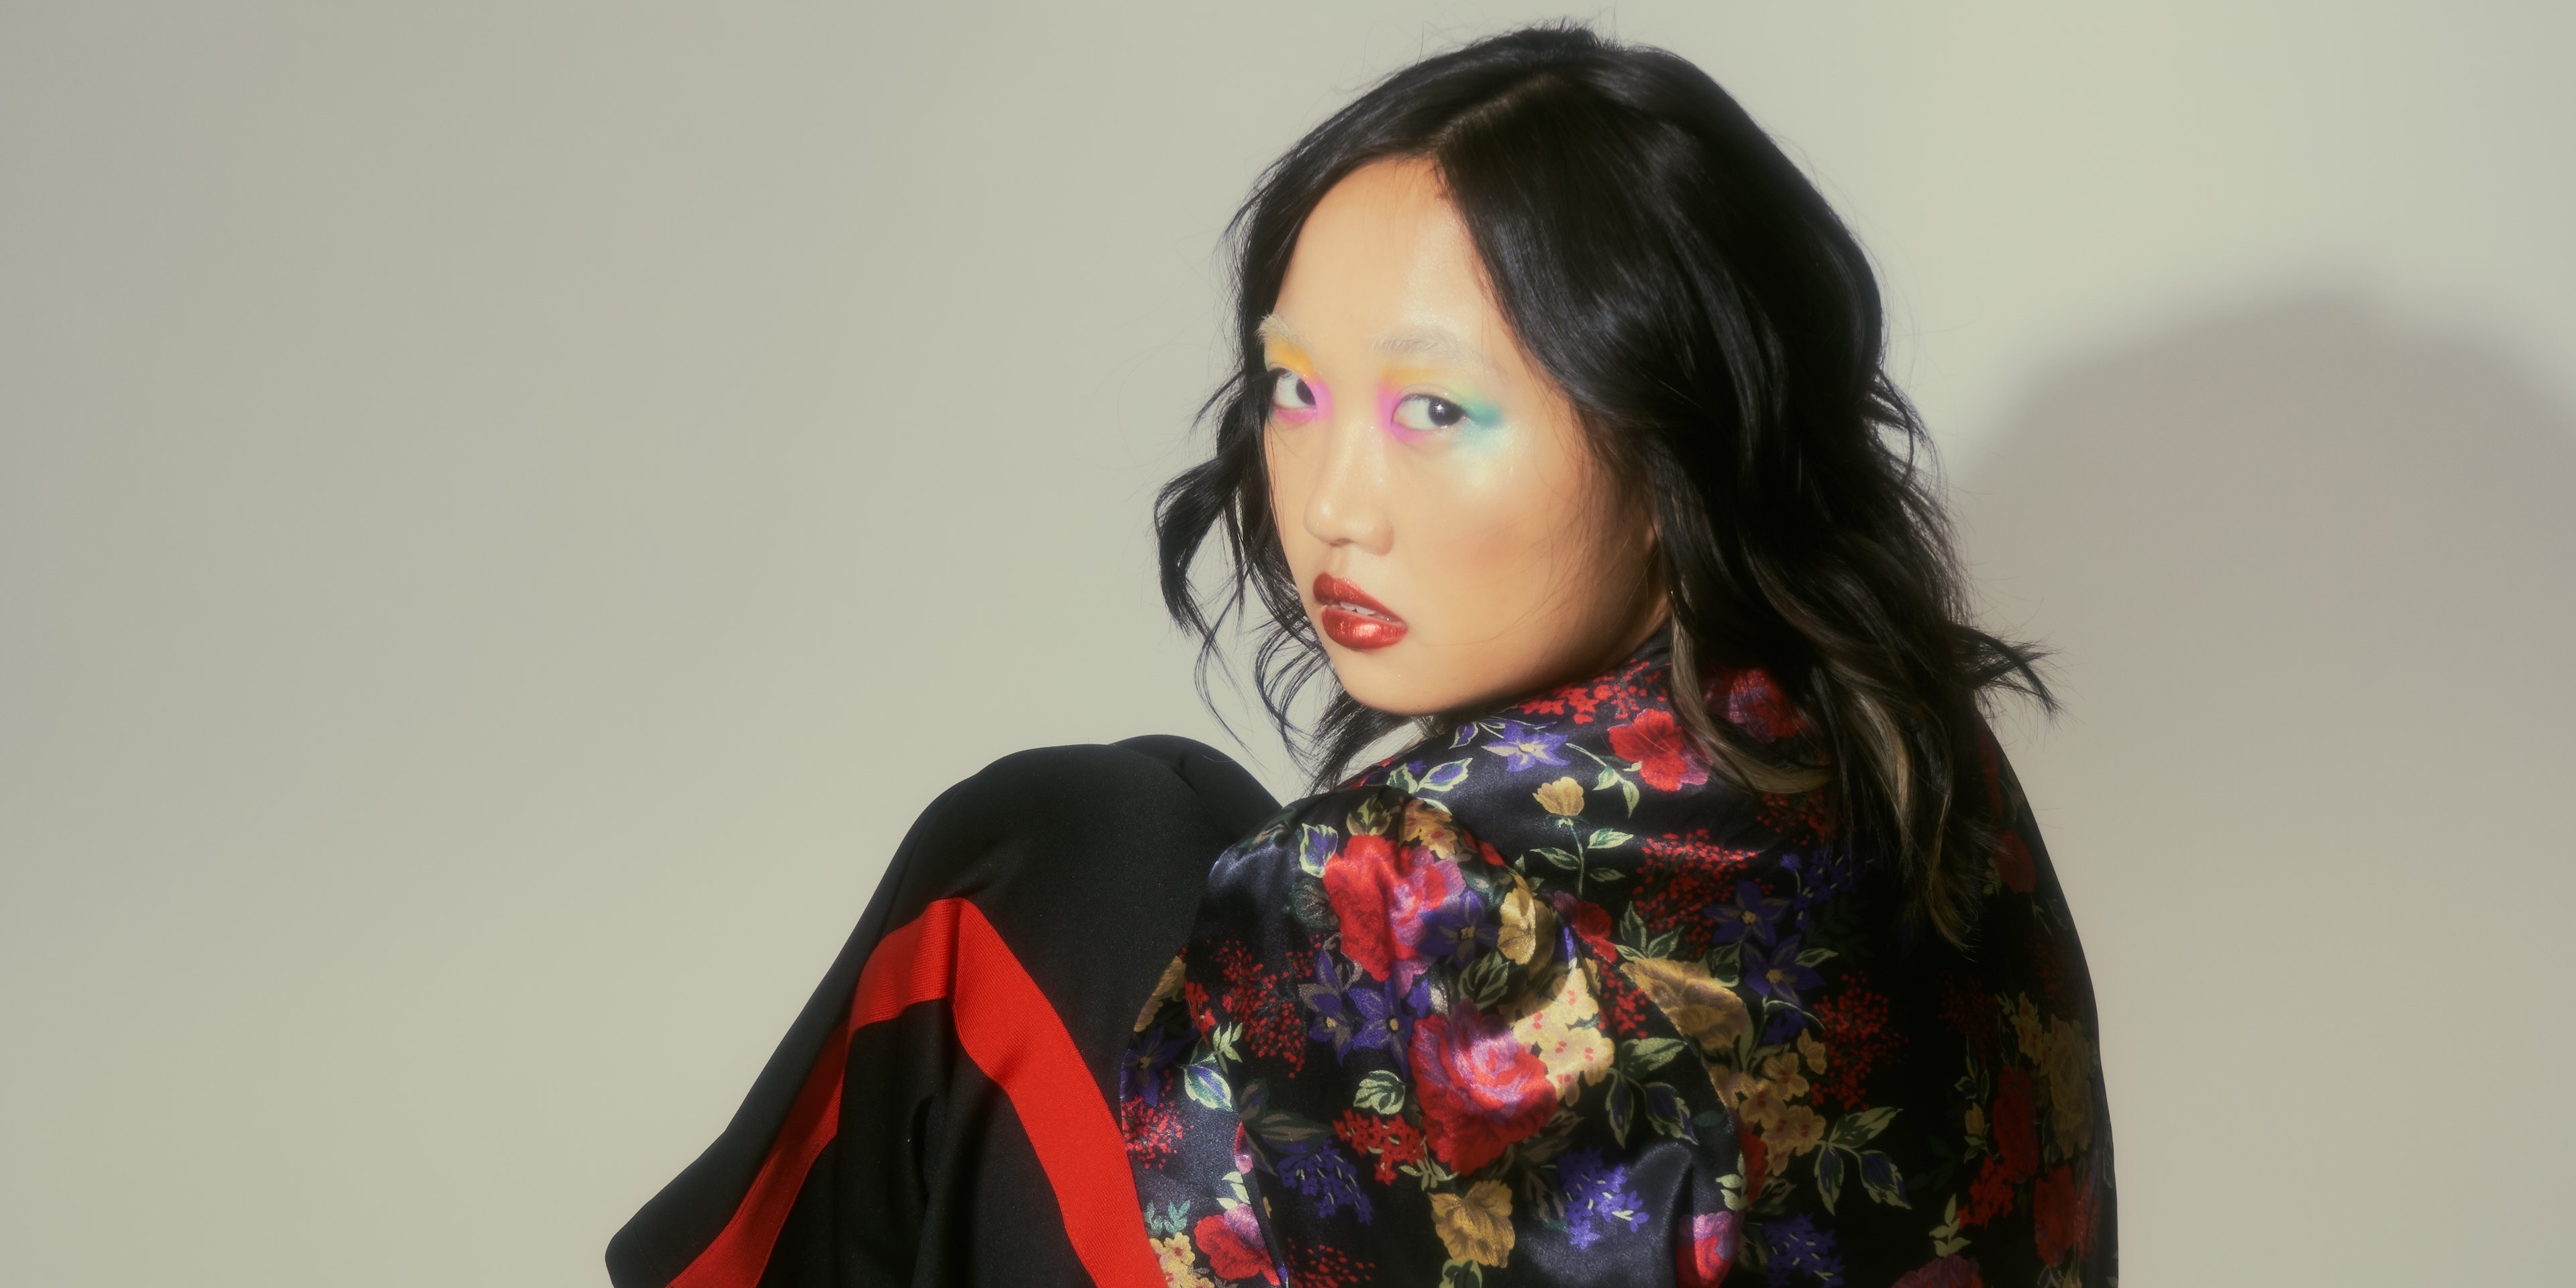 Introducing: "I strive to make quality pop music." – ena mori on her vibrant pop sound